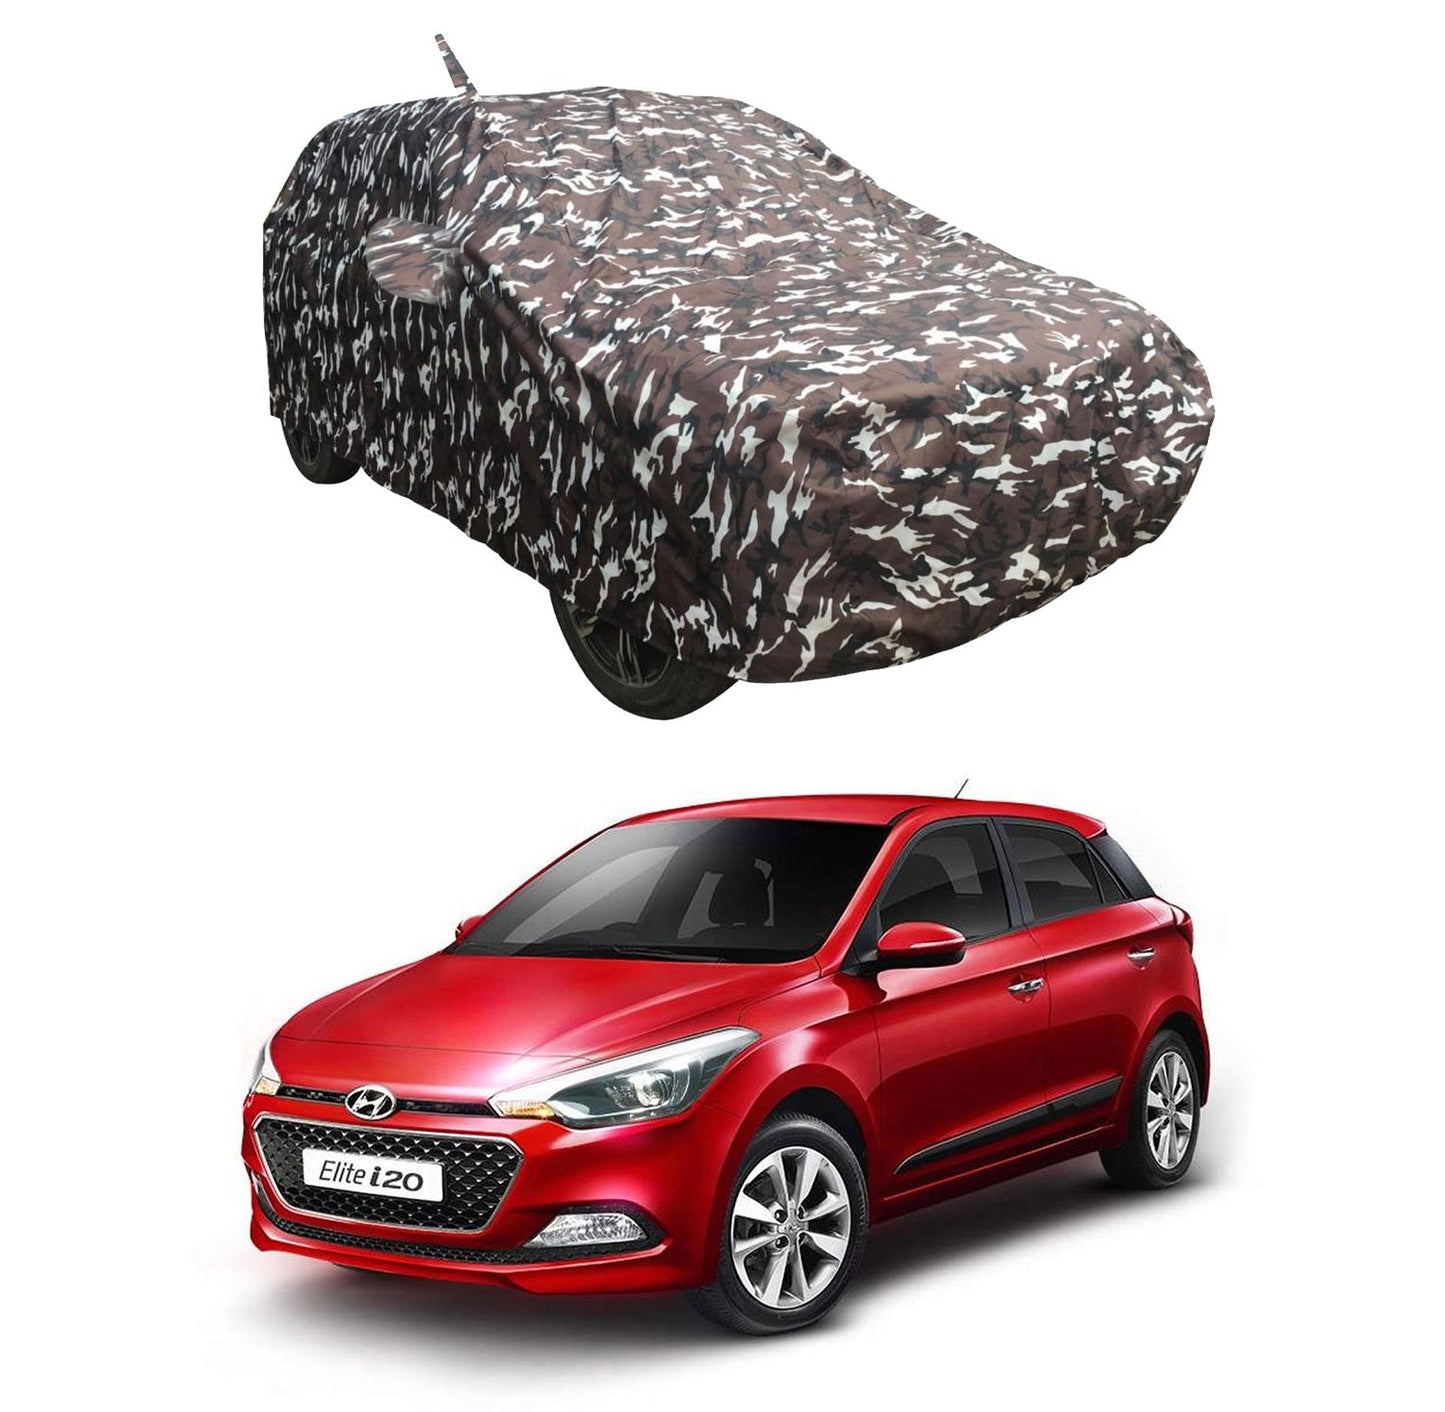 Oshotto Ranger Design Made of 100% Waterproof Fabric Car Body Cover with Mirror Pockets For Hyundai i20 Elite/Active 2014-2023 (with Antenna Pocket)